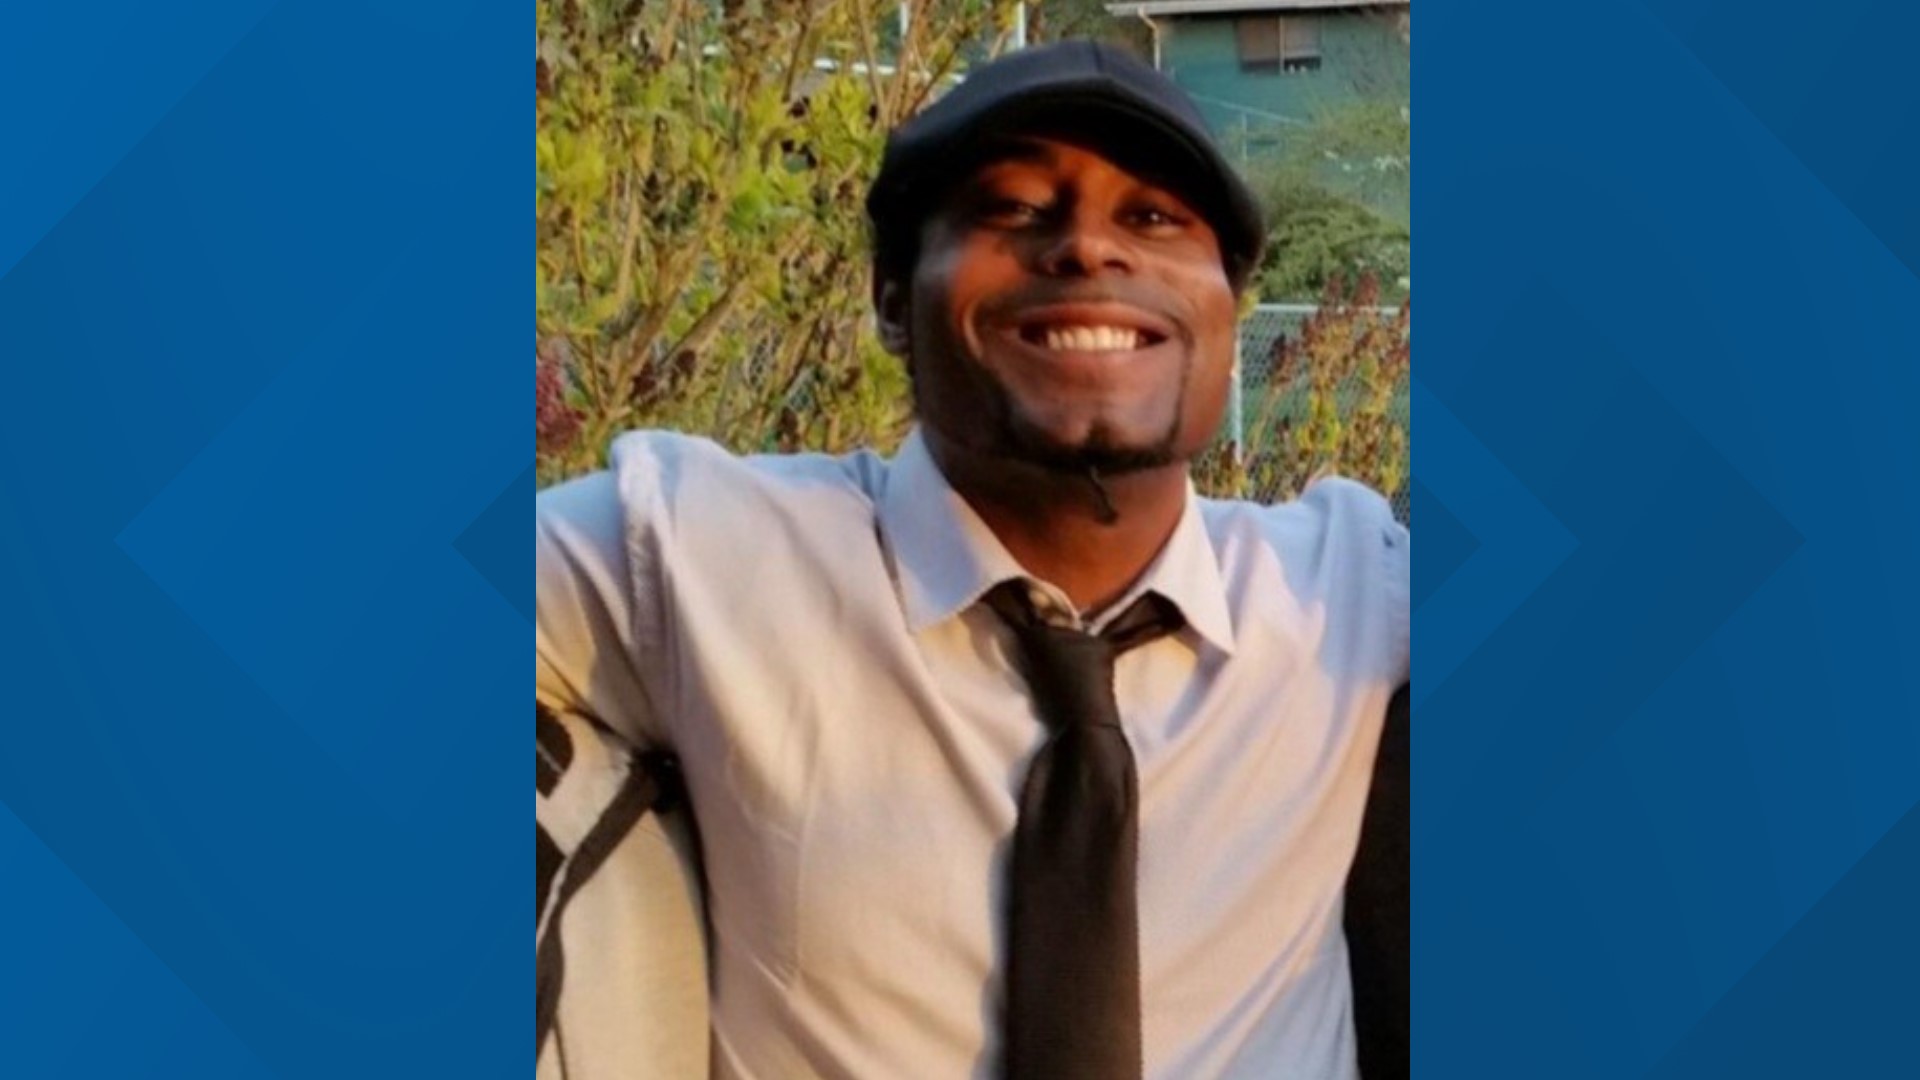 The family of a man who was shot and killed by an Olympia police officer says he was dealing with a mental health episode at the time of the shooting.